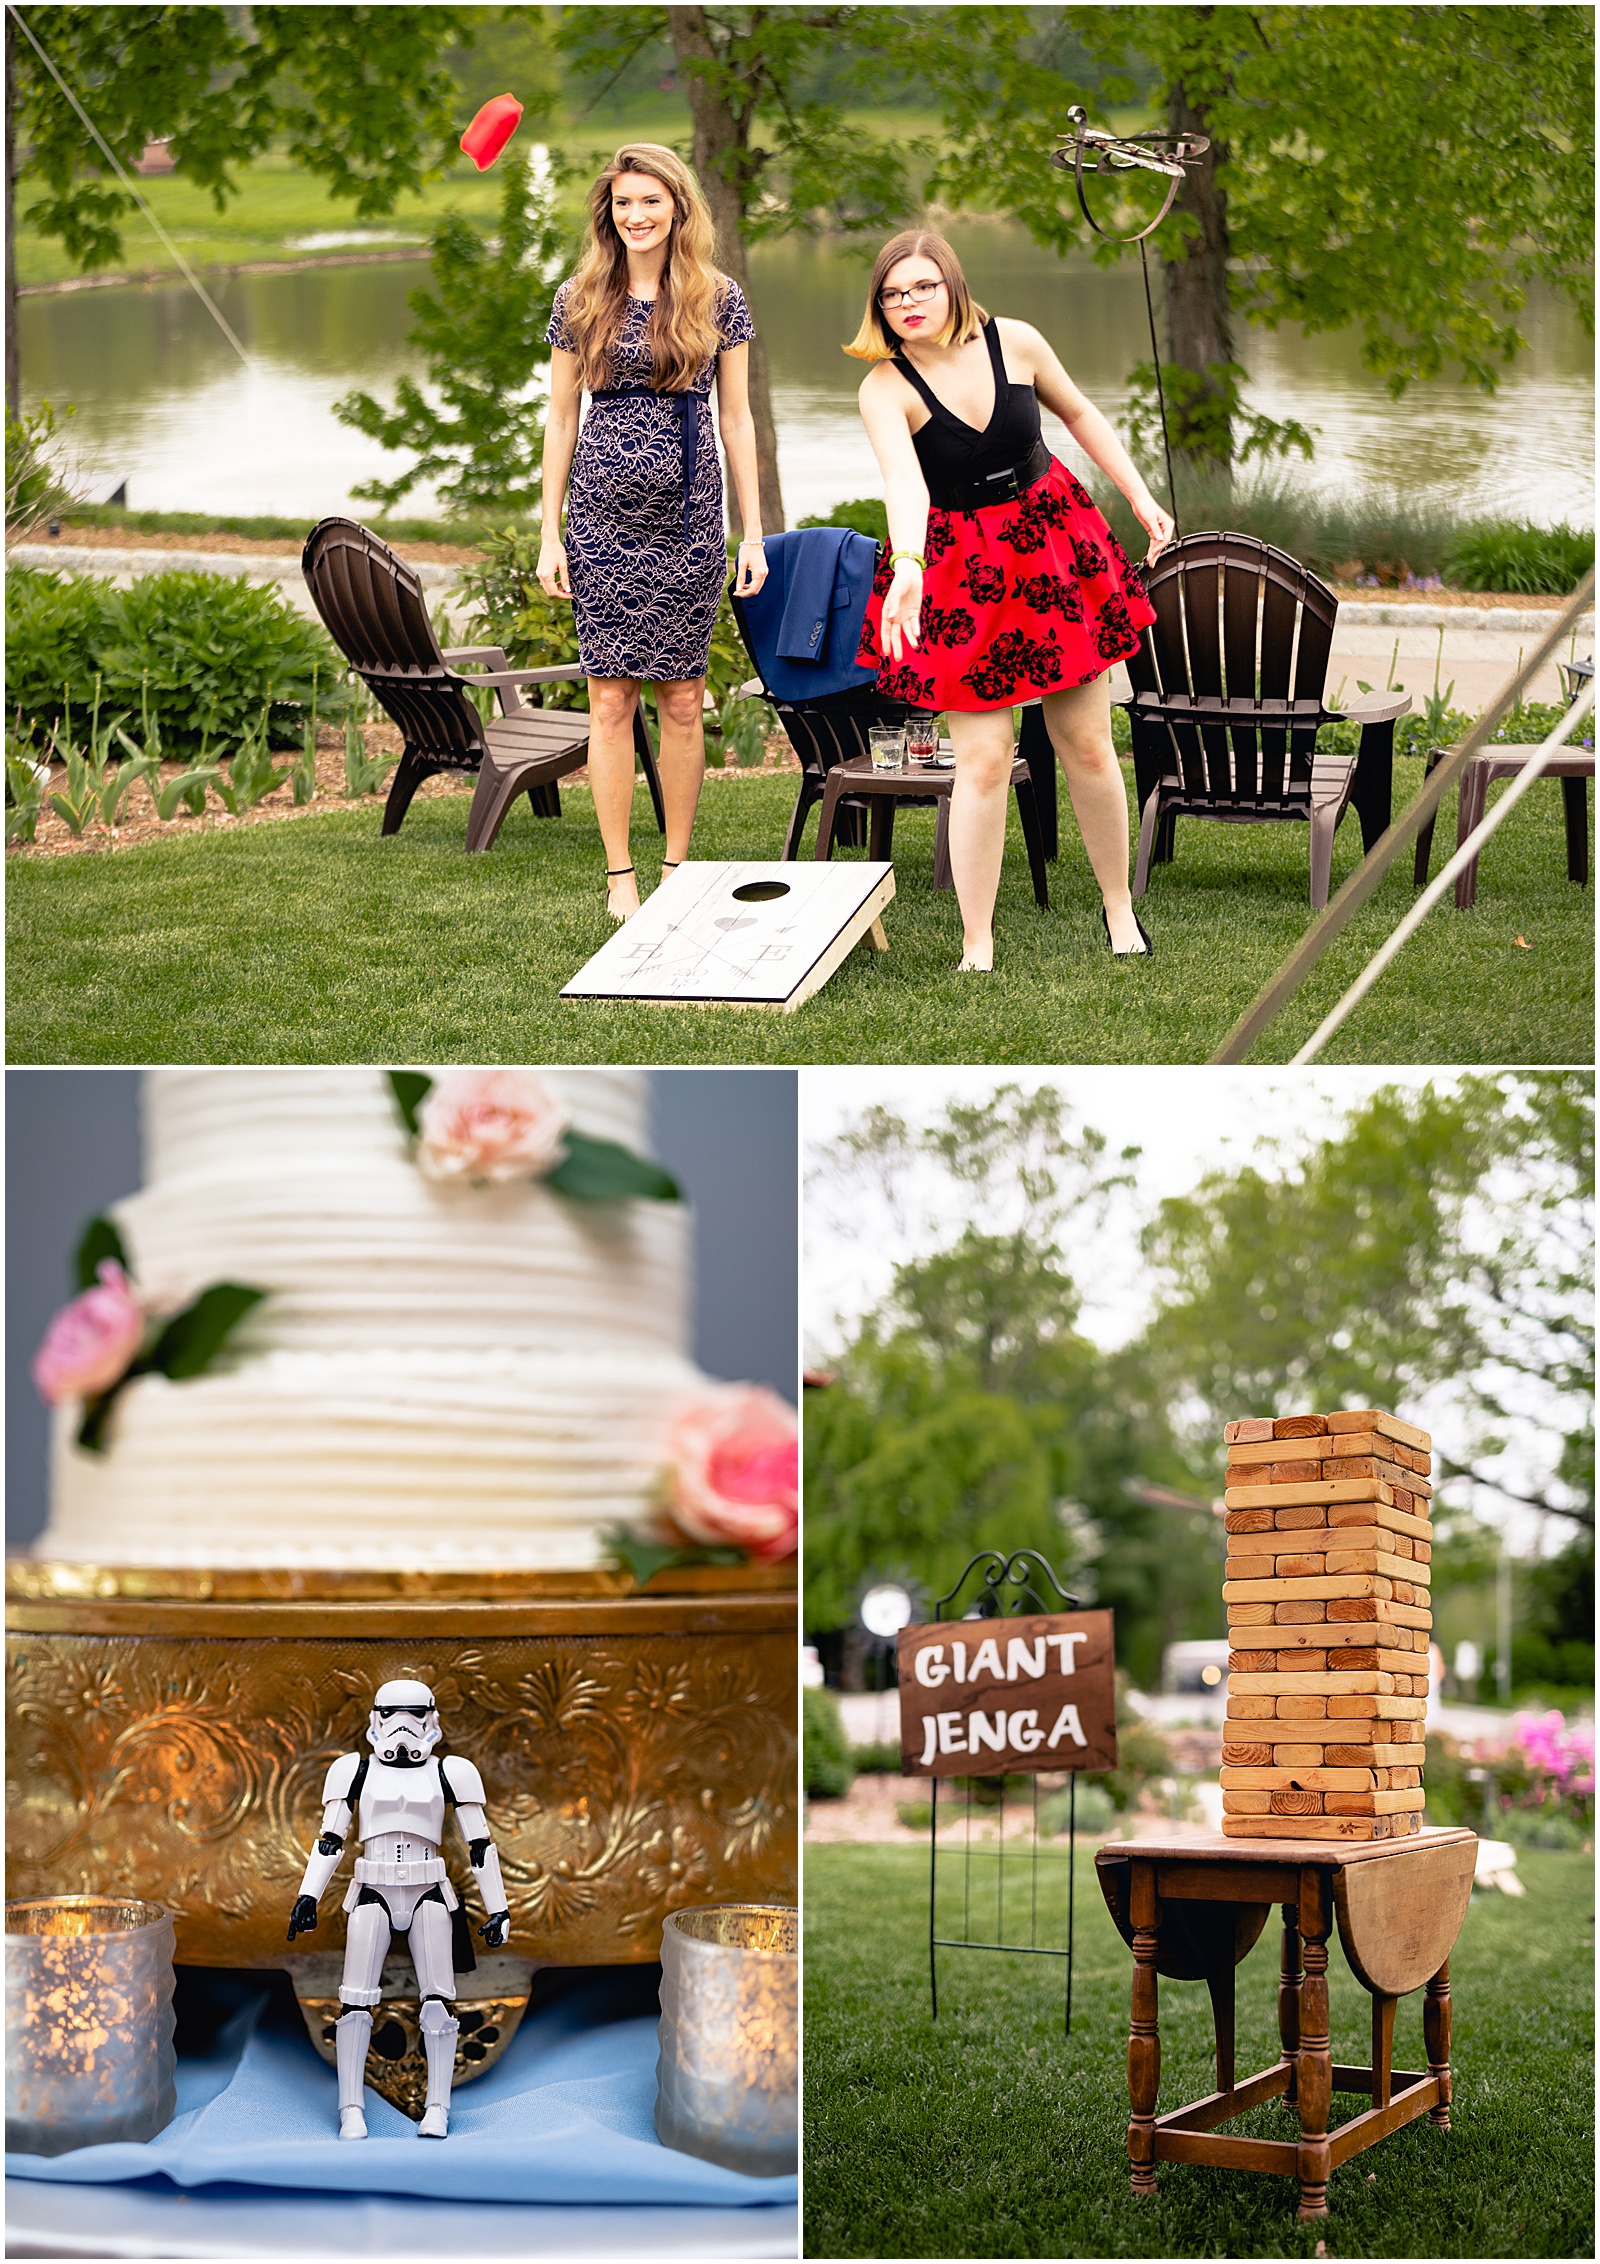 Star Wars Wedding in South New Jersey | Party Games